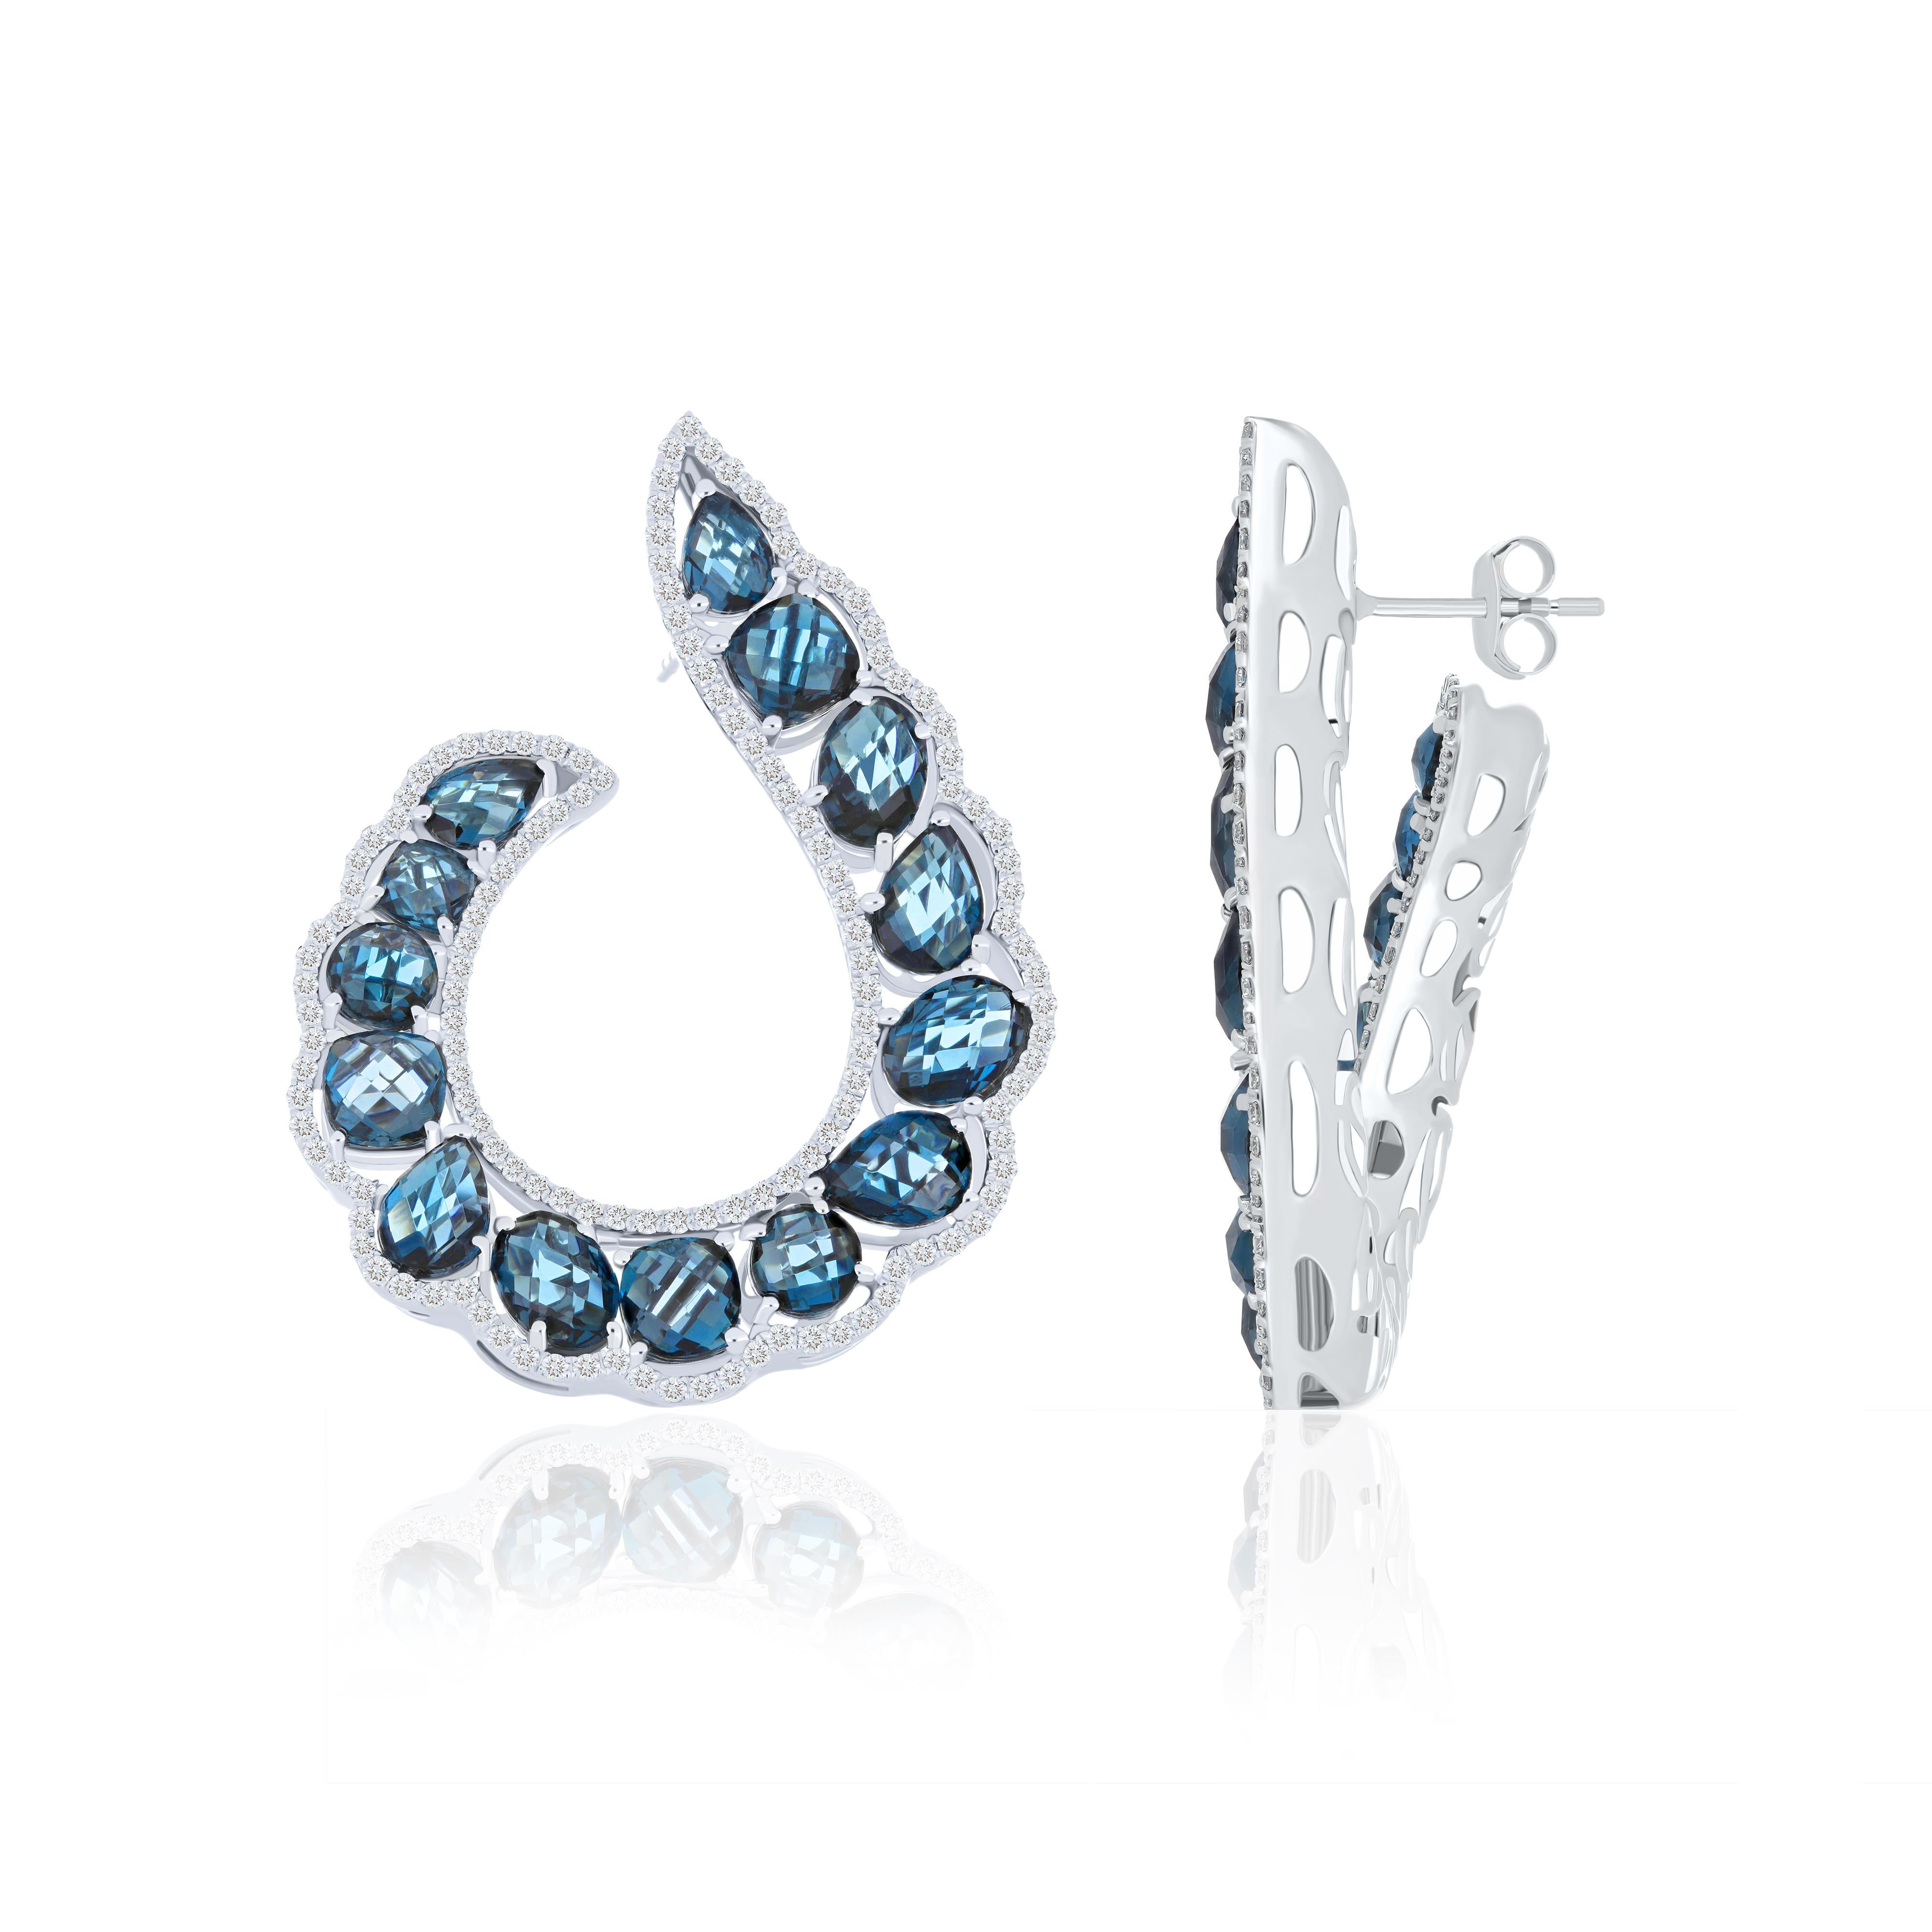 Elegant and Exquisitely detailed White Gold earrings, set with 19.00 CT's. (total approx.) beautiful and vibrant London Blue Topaz accented with micro pave Diamonds, weighing approx. 1.95 cts. (approx.). total carat weight. Beautifully Hand-Crafted